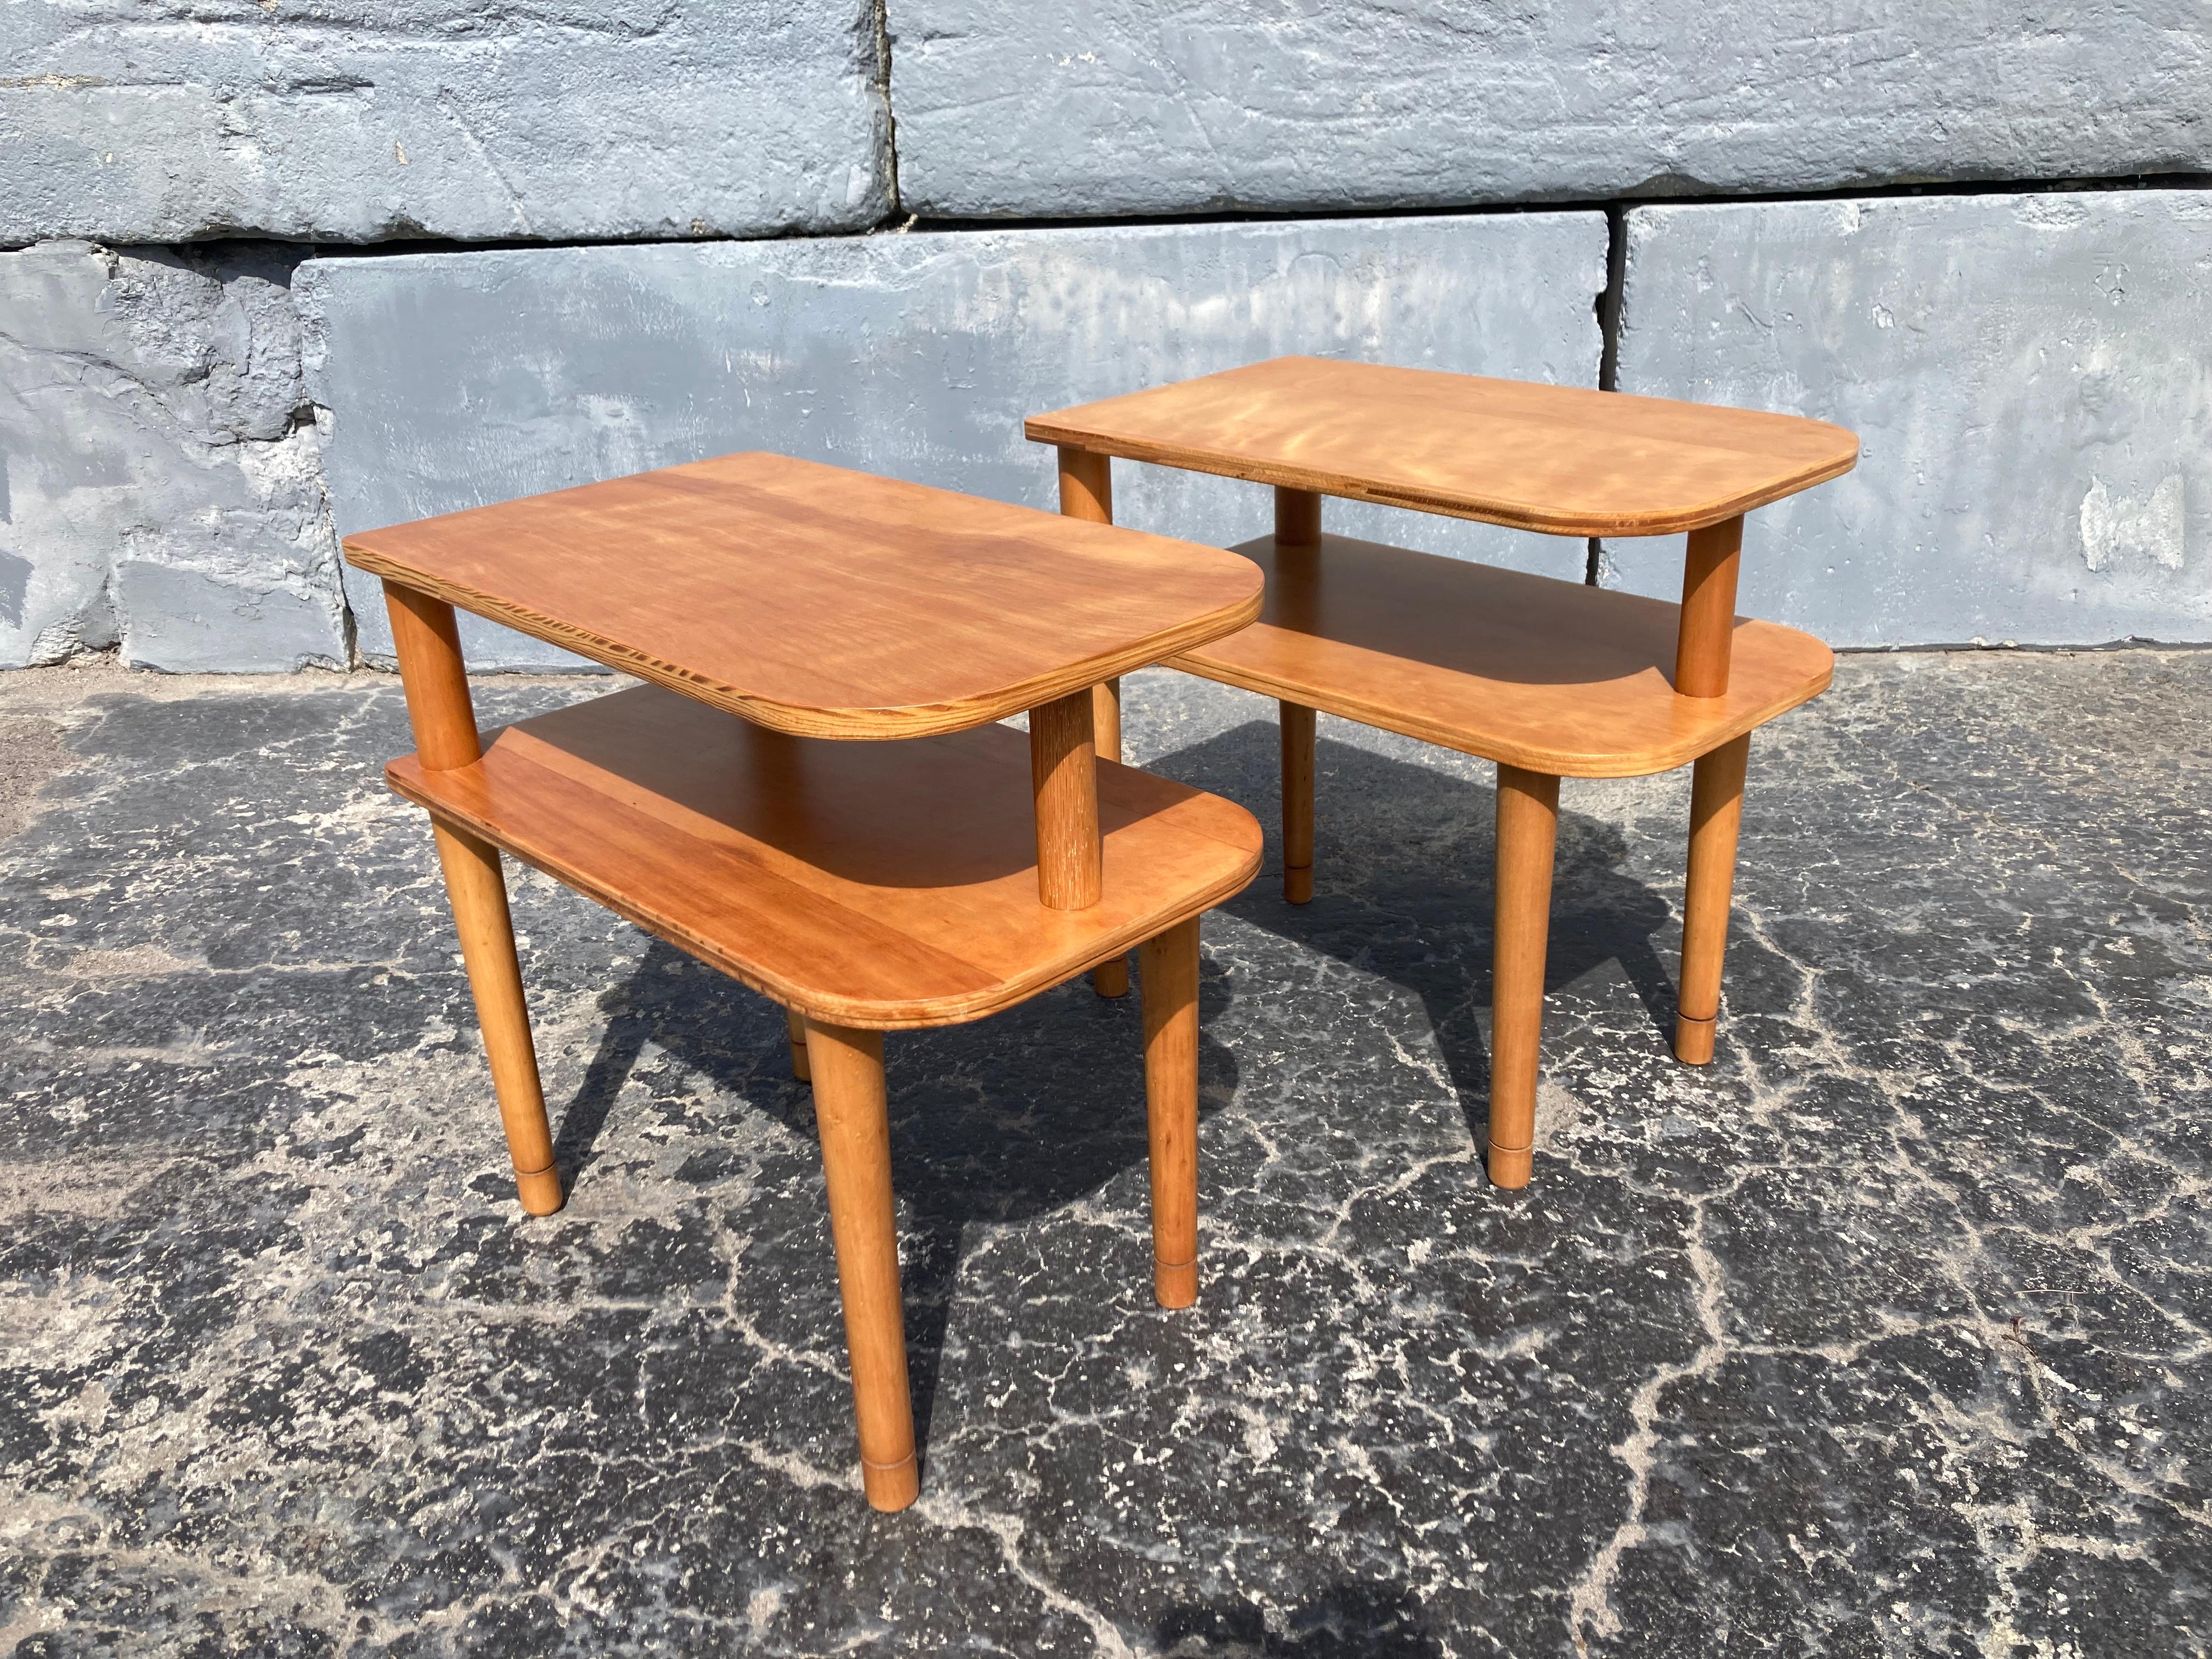 Great pair of end tables from the 1950s. Ready for a new home.